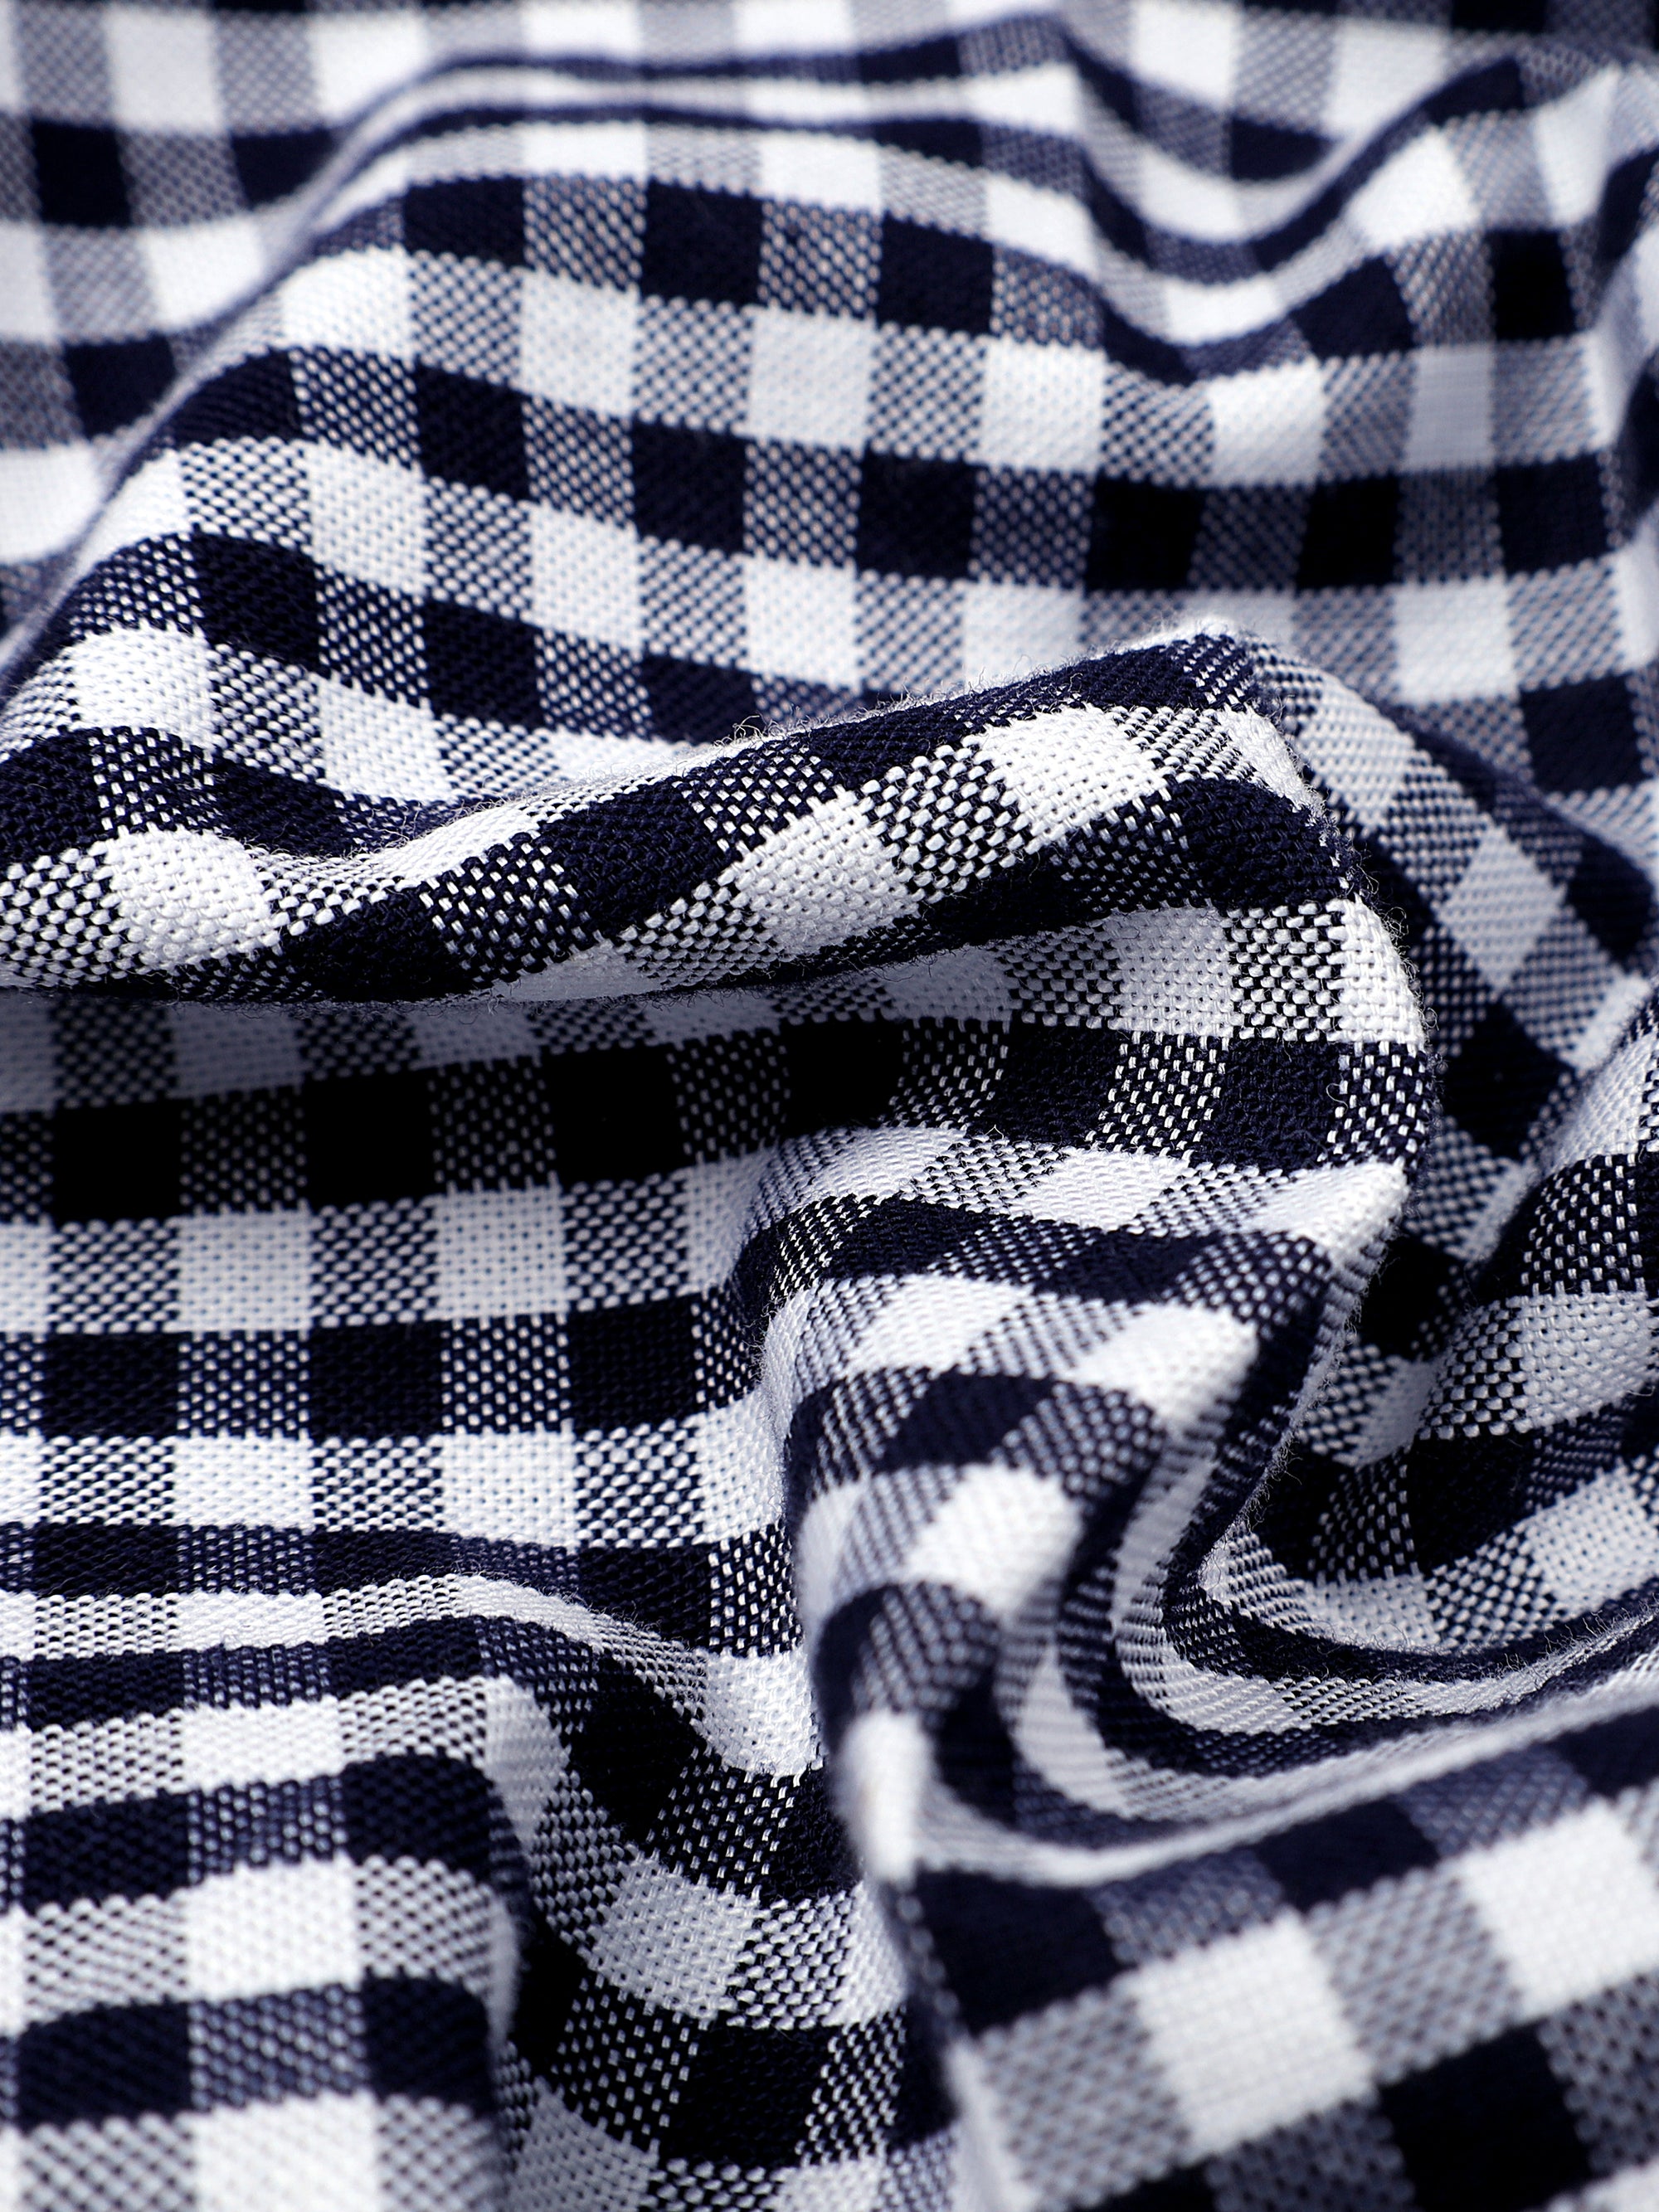 Millennium Blue With White Gingham Check Oxford Cotton Shirt-[ON SALE]